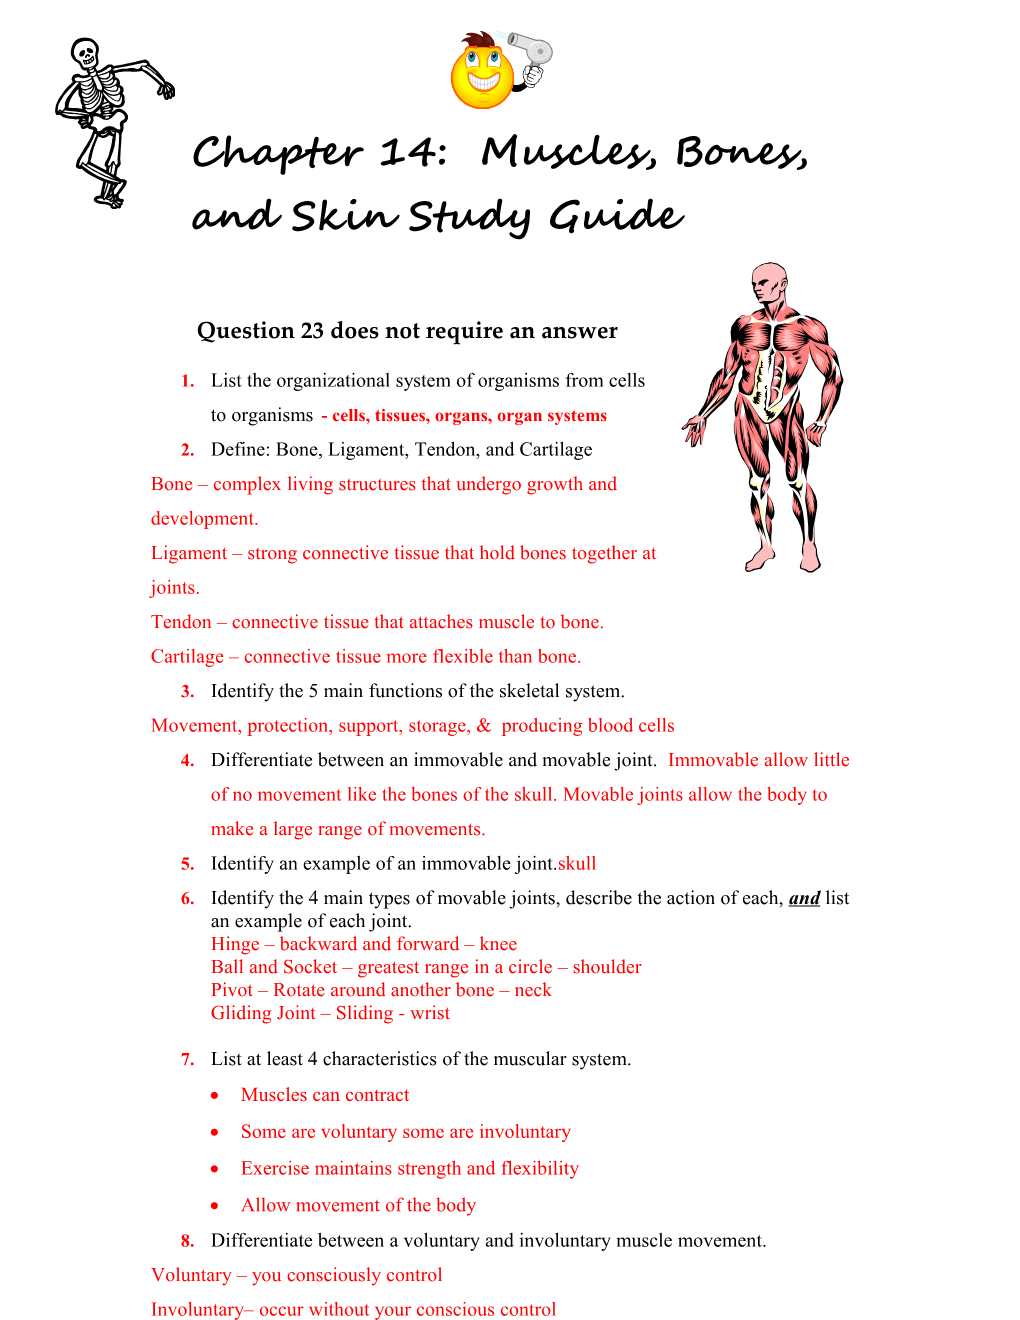 Chapter 14: Muscles, Bones, And Skin